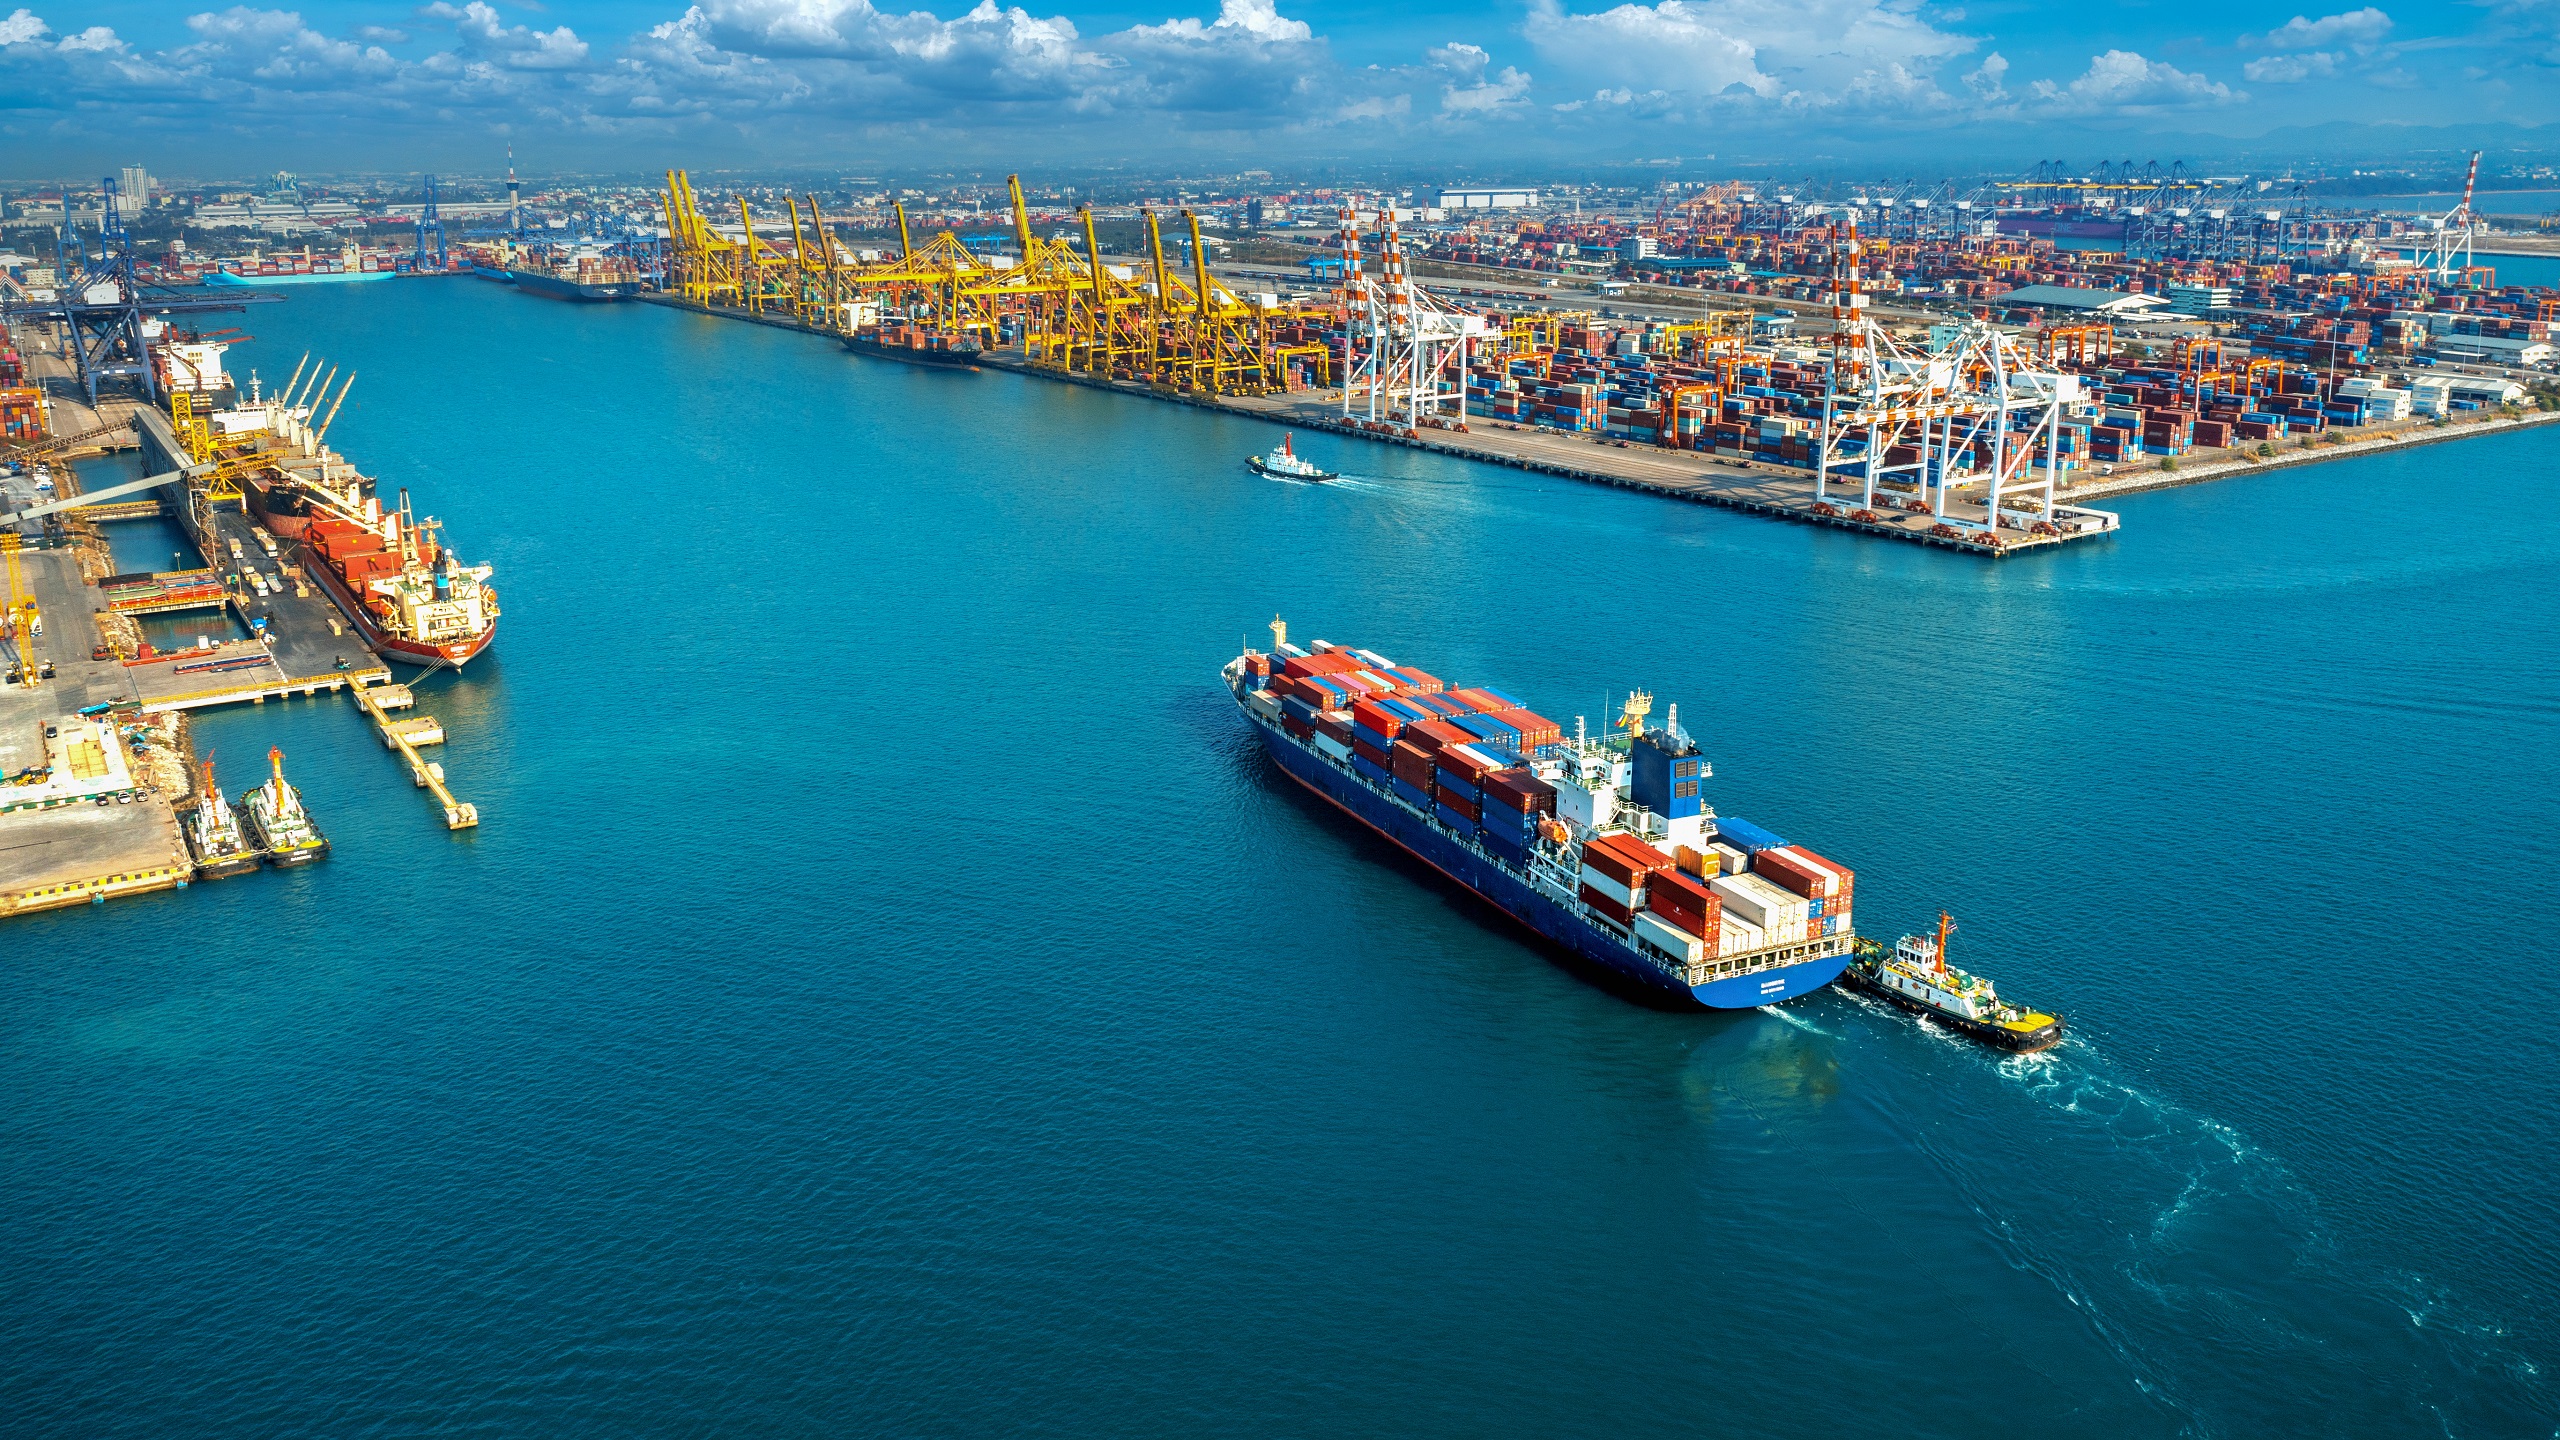 DP World Plans Significant Expansion of Container Handling Capacity by Year-End